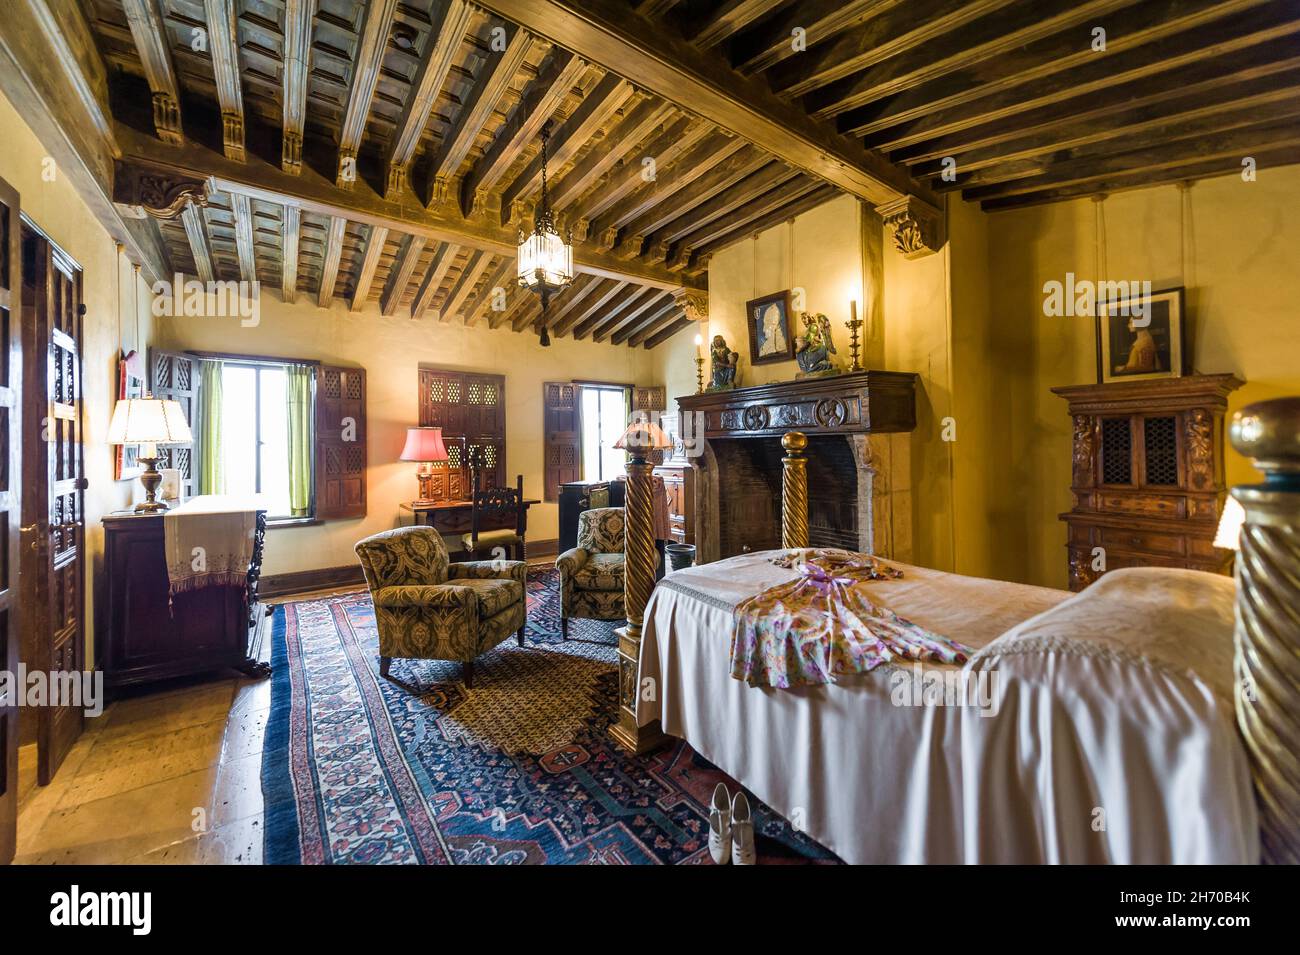 California, USA, 09 Jun 2013: Bedroom with intricate carvings and fireplace at Hearst Castle, which is a National and California Historical Landmark o Stock Photo